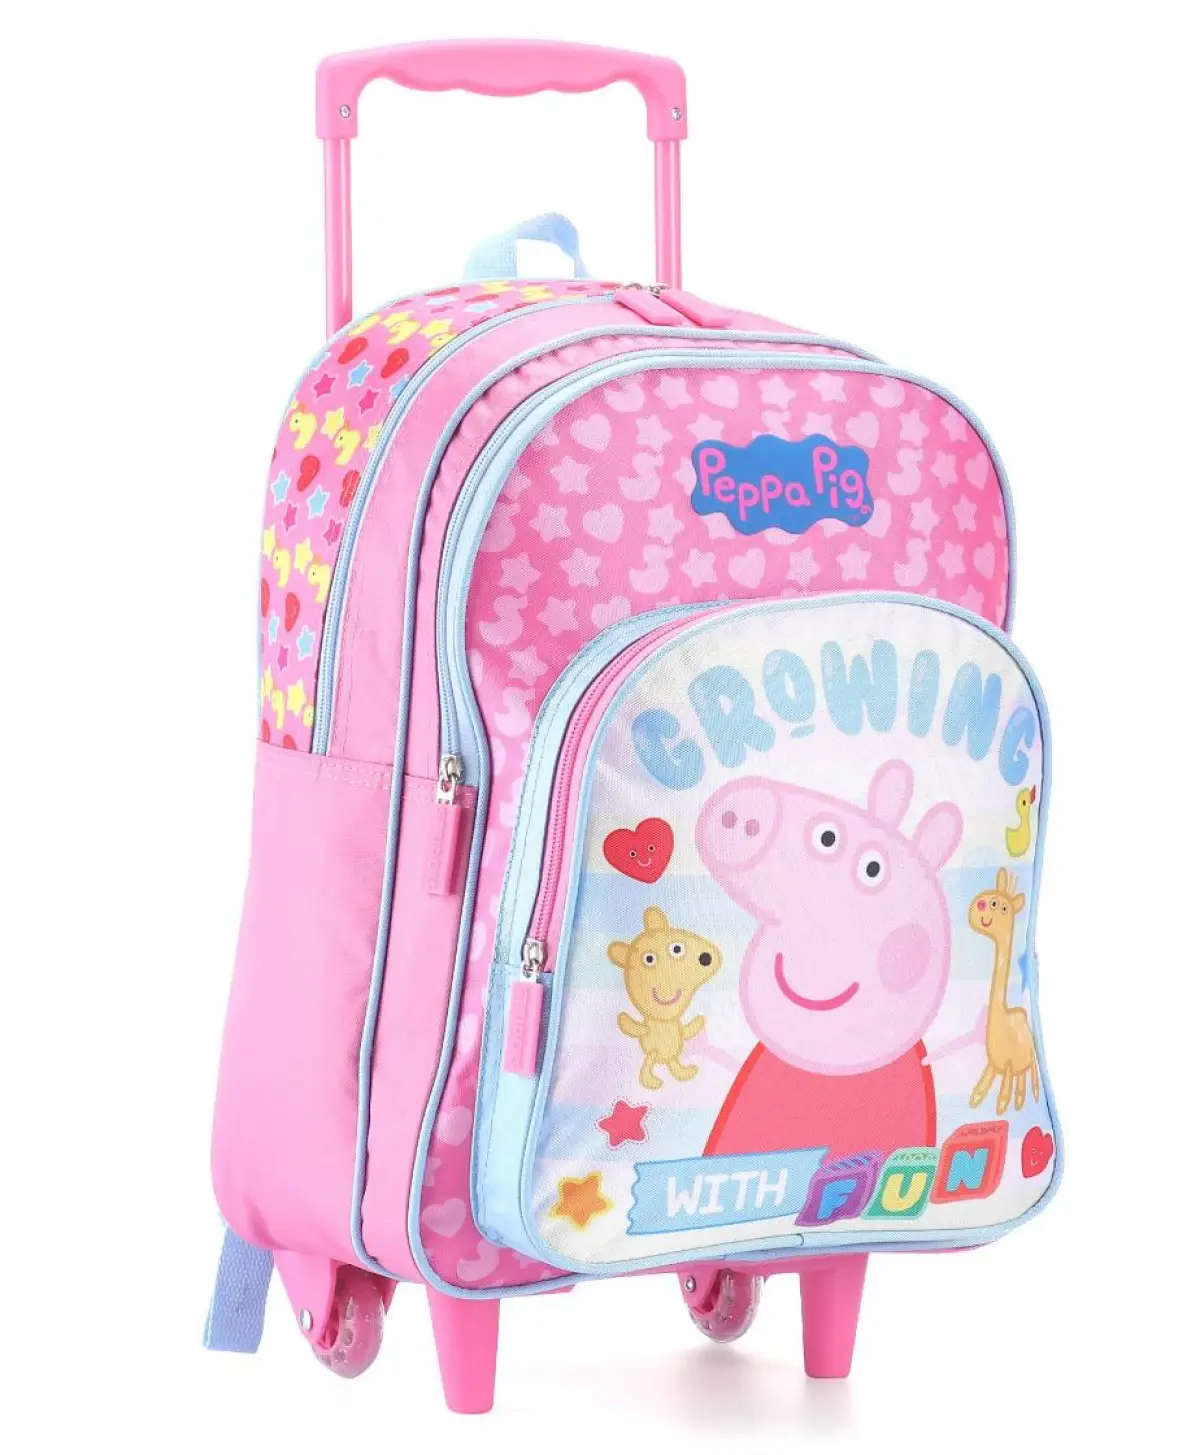 Striders 16 inches Peppa Pig-Inspired School Trolley Bag for Little Explorers Multicolor For Kids Ages 6Y+